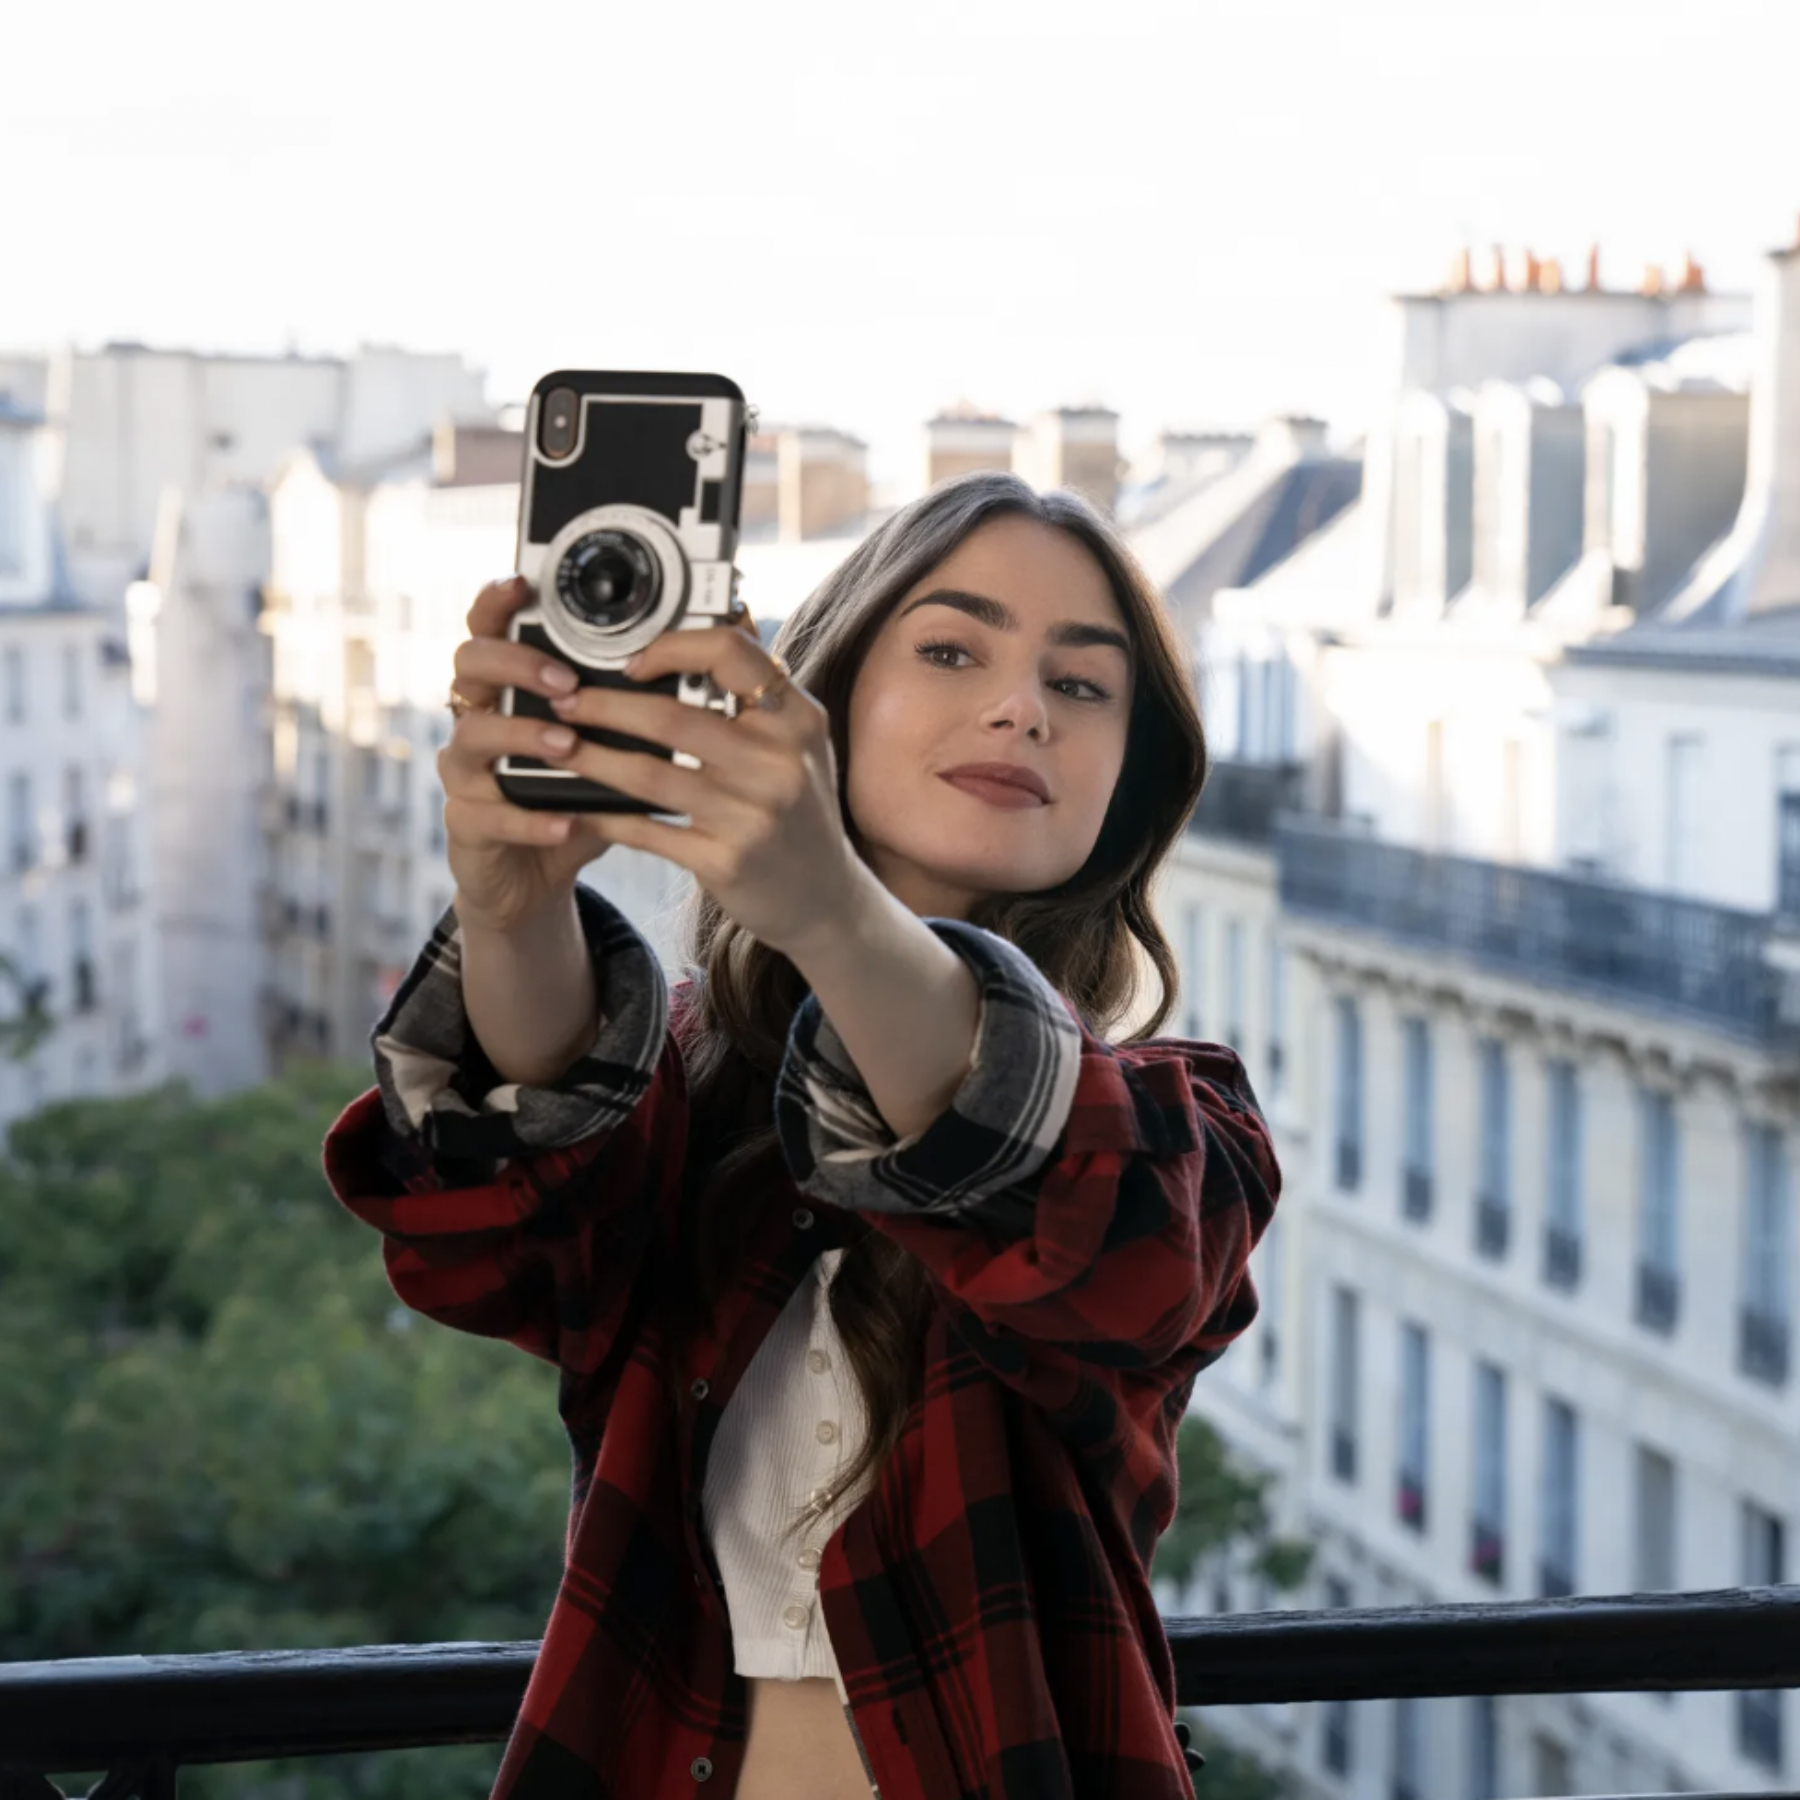  Emily In Paris fans are obsessed with Emily's phone case - here's where to buy it for £30 